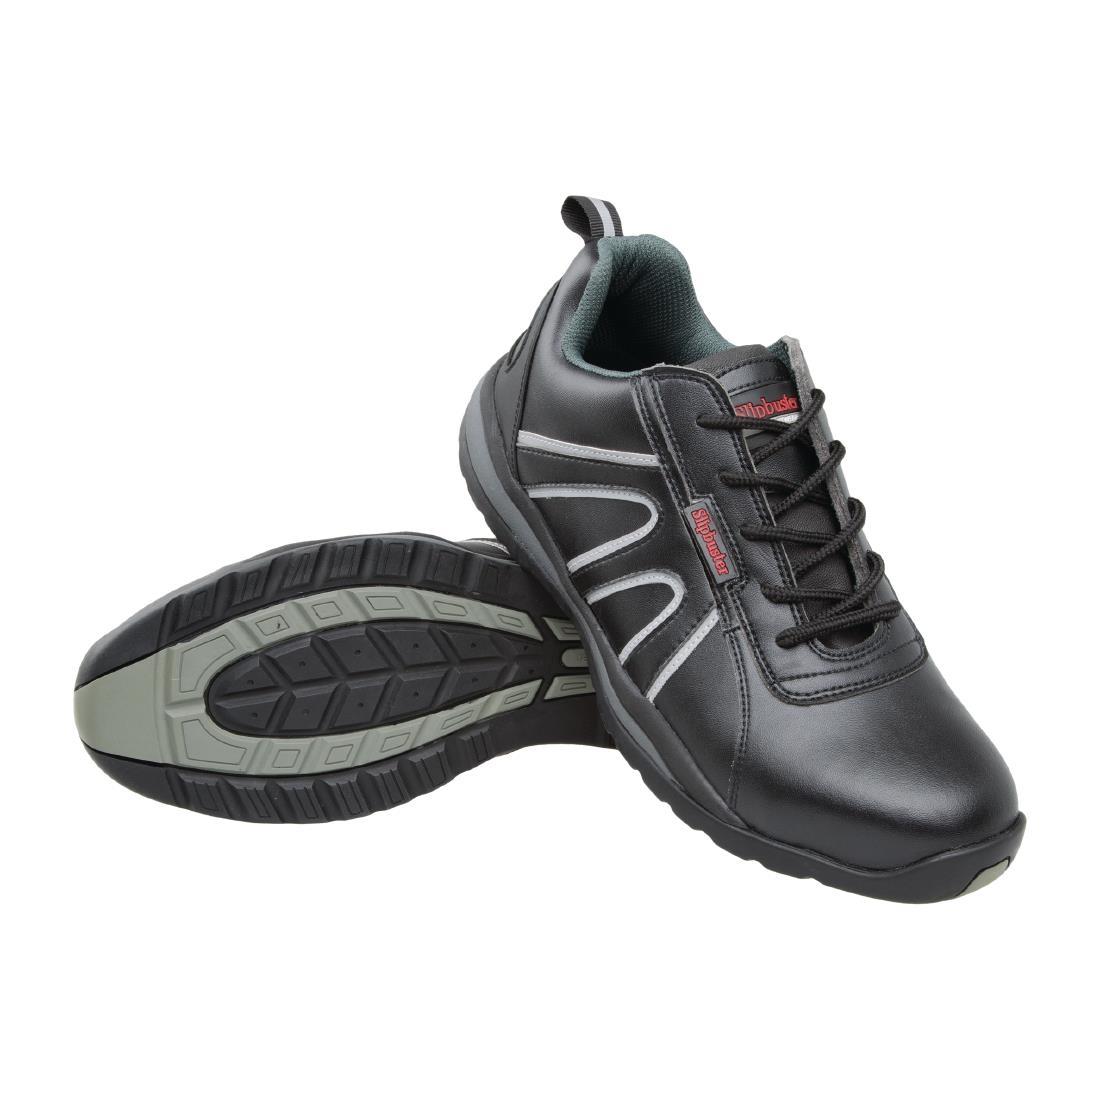 Slipbuster Safety Trainers Black 41 - A708-41  - 2